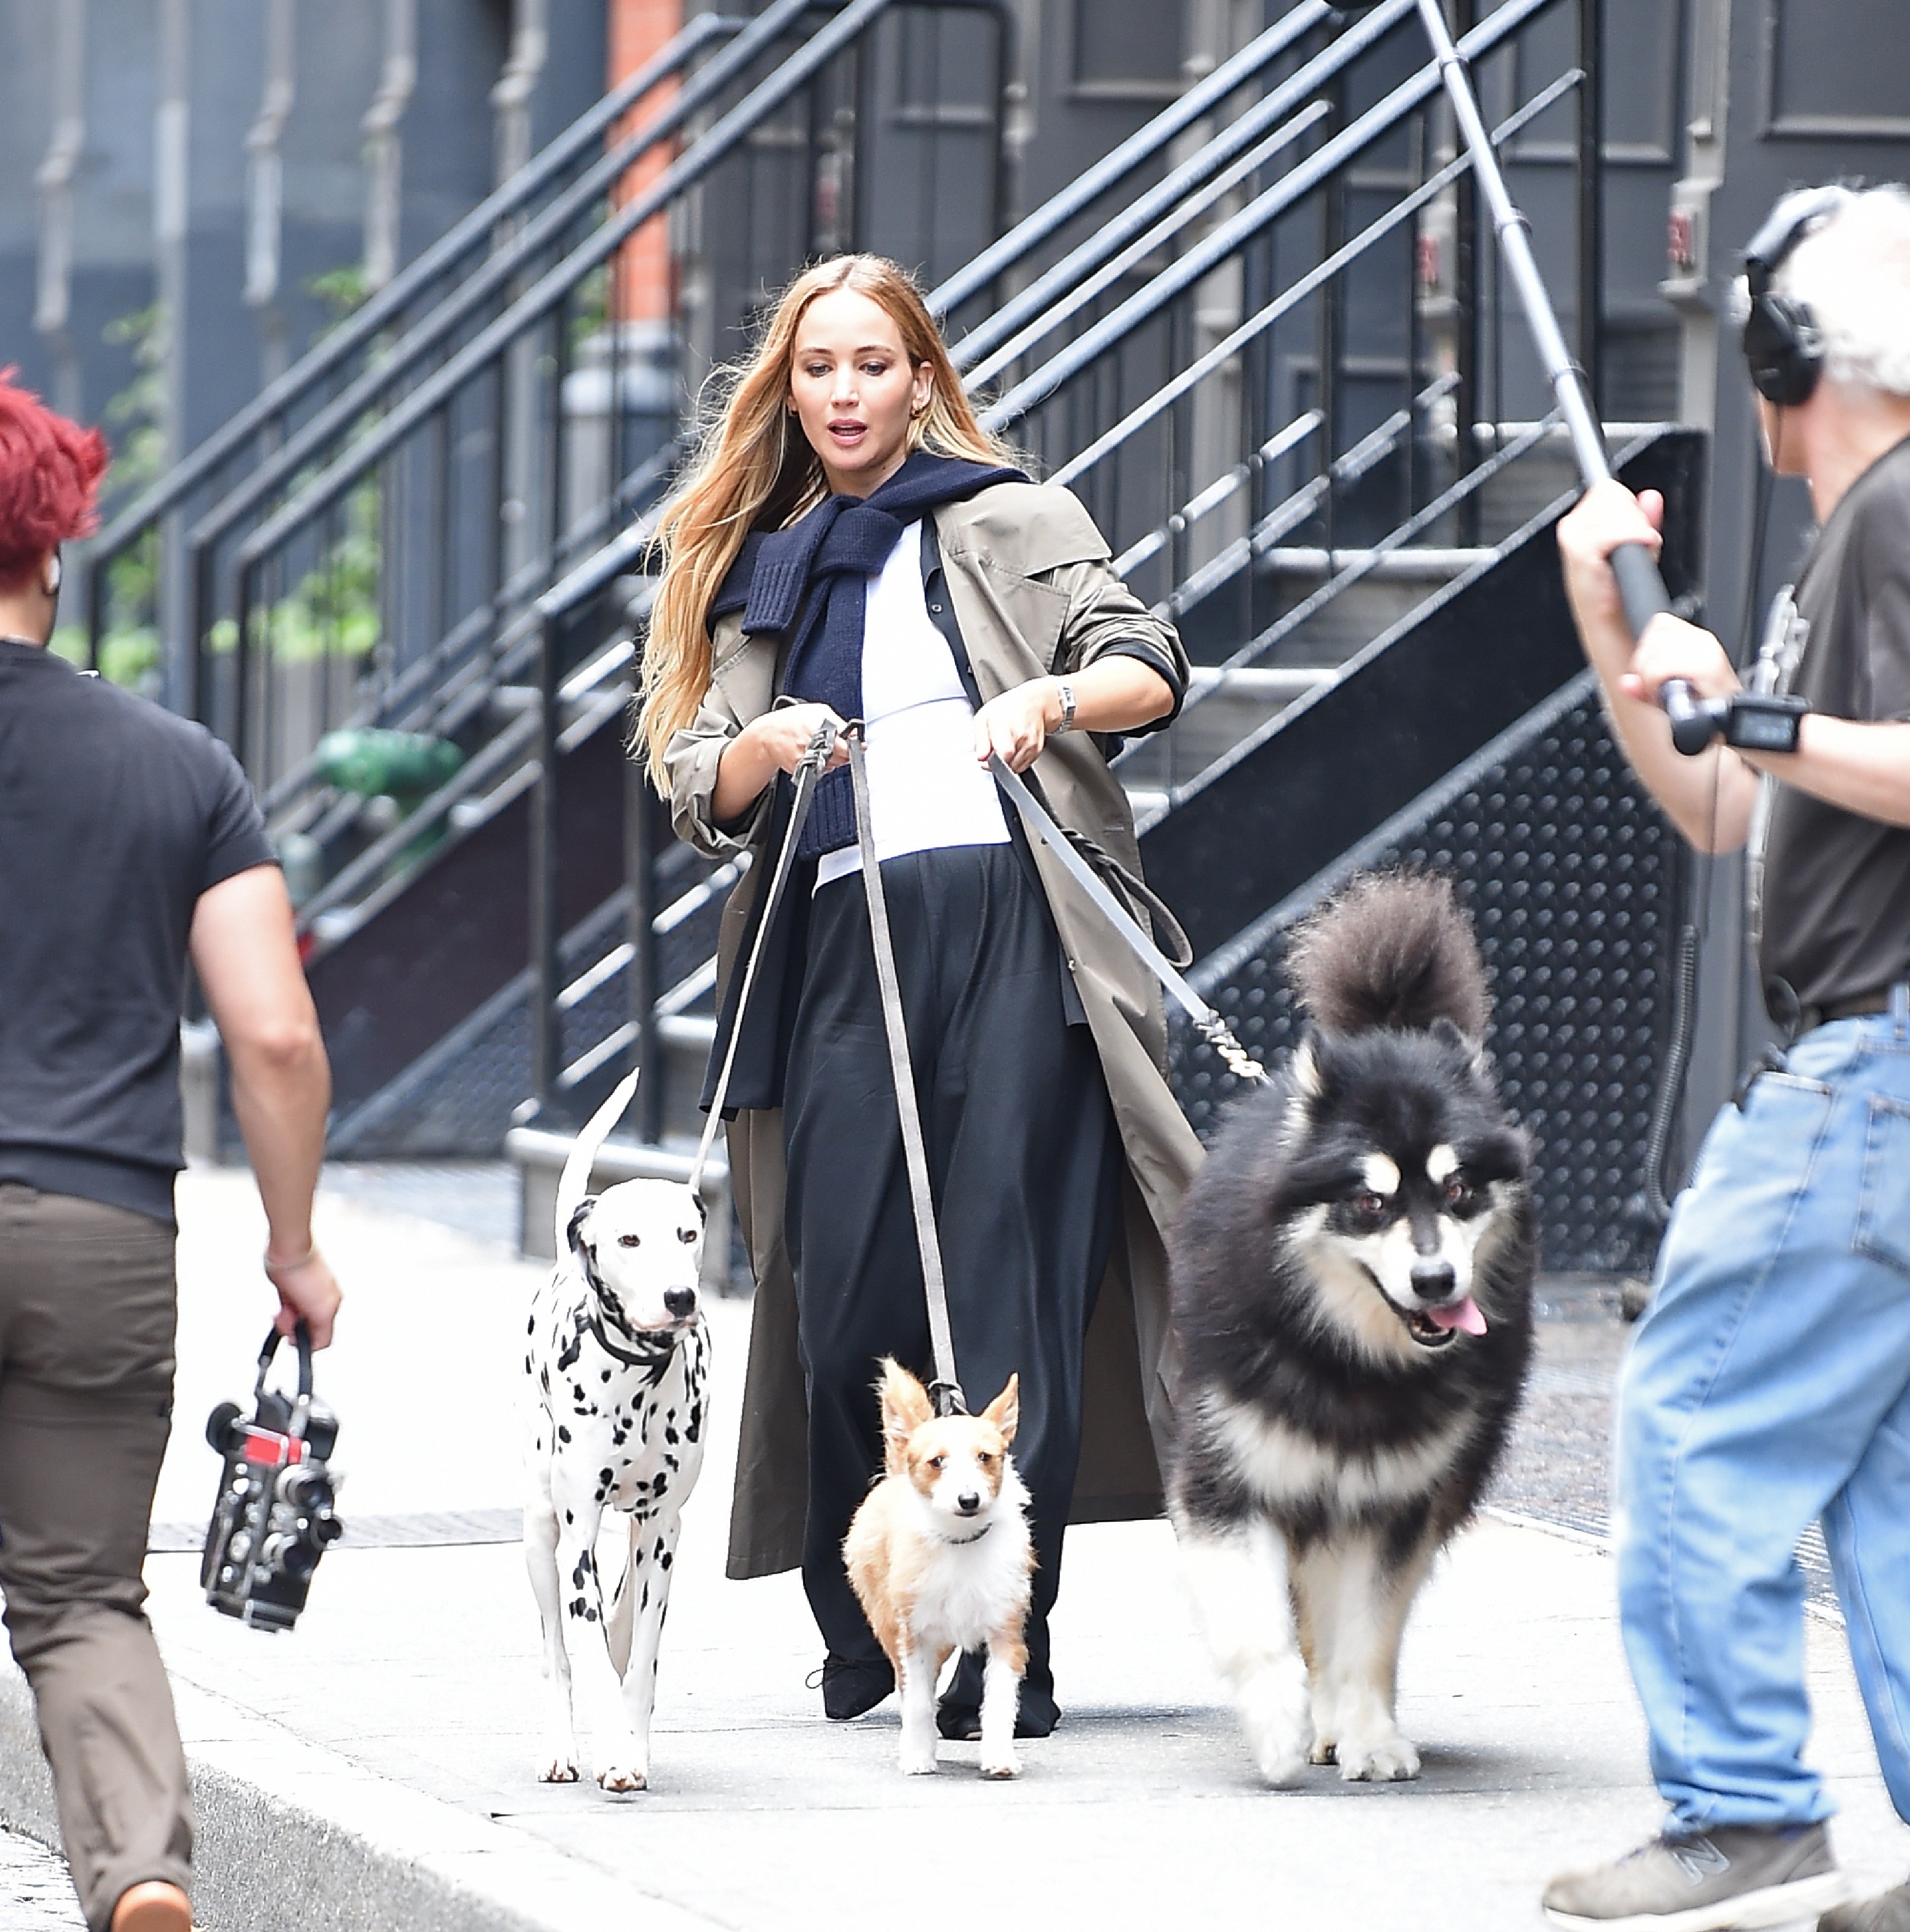 Jennifer Lawrence is seen on set walking with three dogs on June 28, 2023, in NEW YORK, New York. | Source: Getty Images